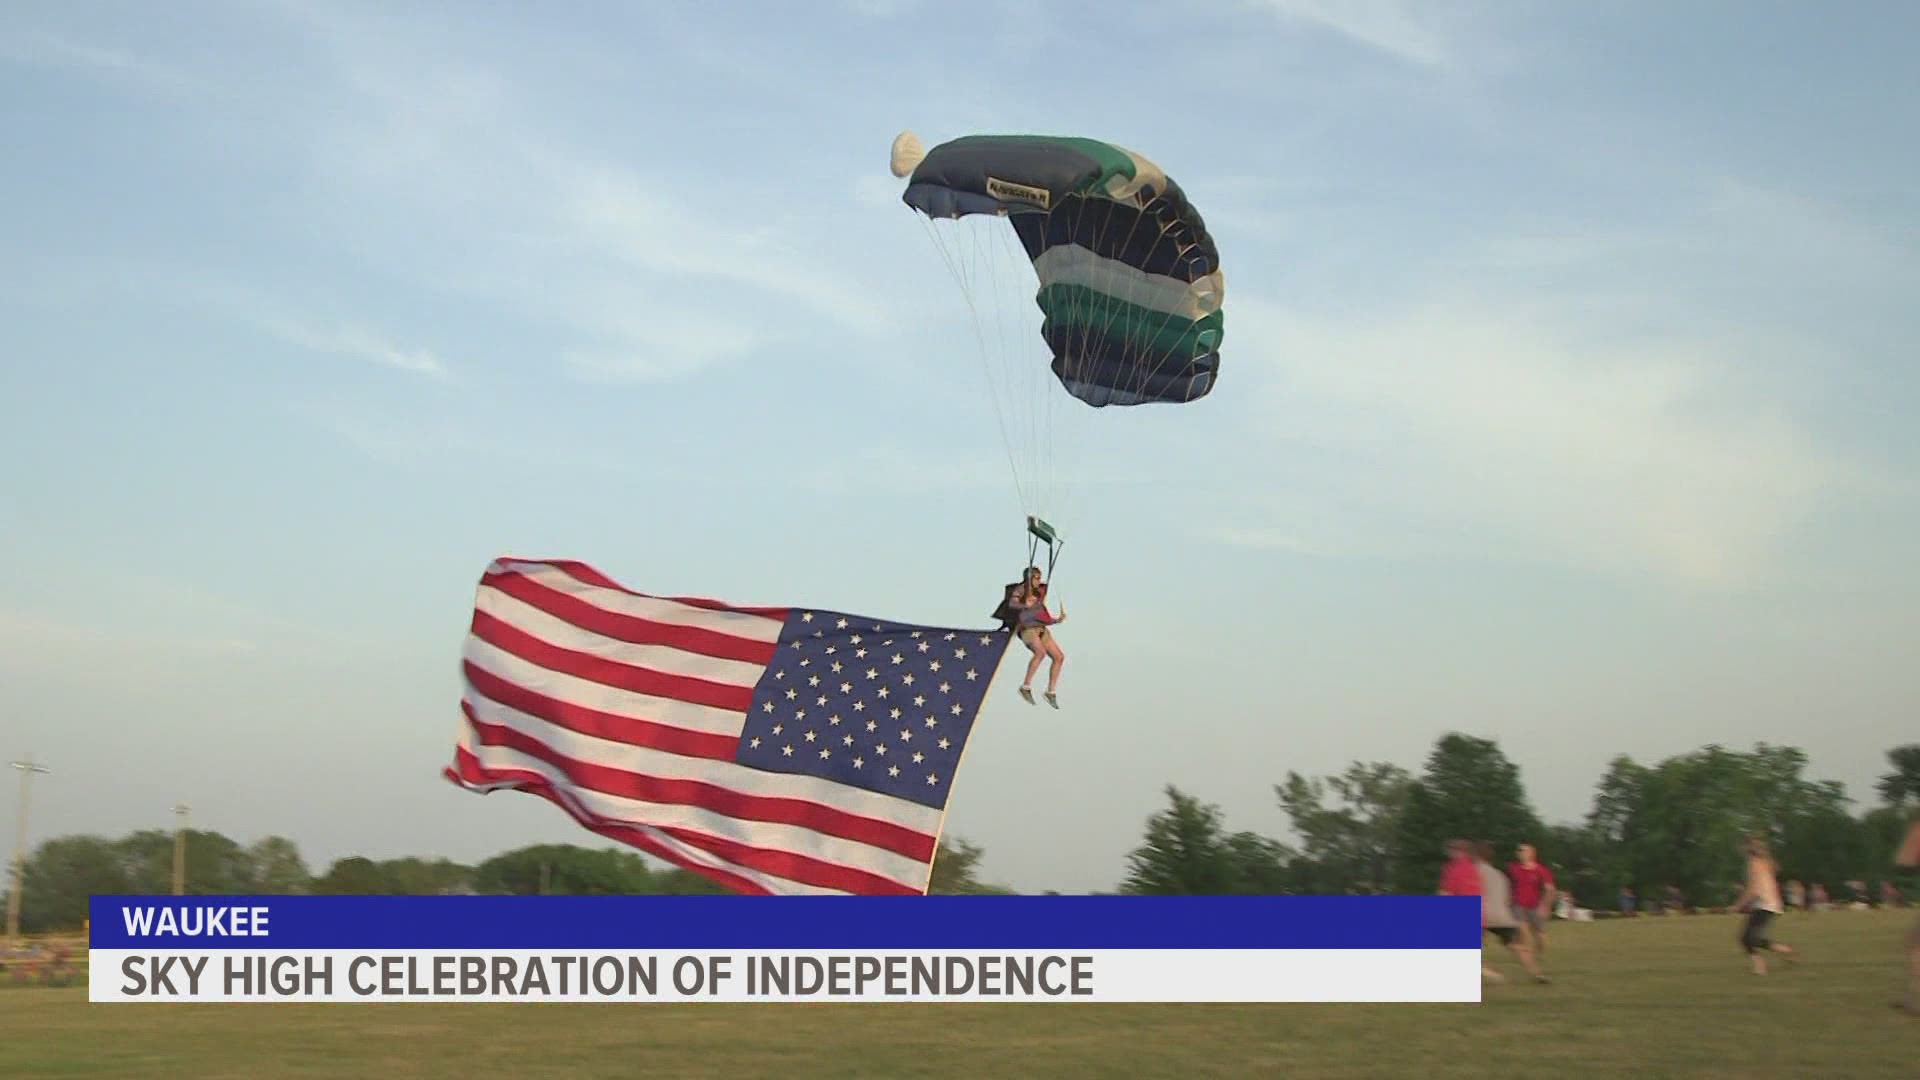 Four professional skydivers put on a show that, followed by fireworks, capped off a three-day celebration in Waukee.